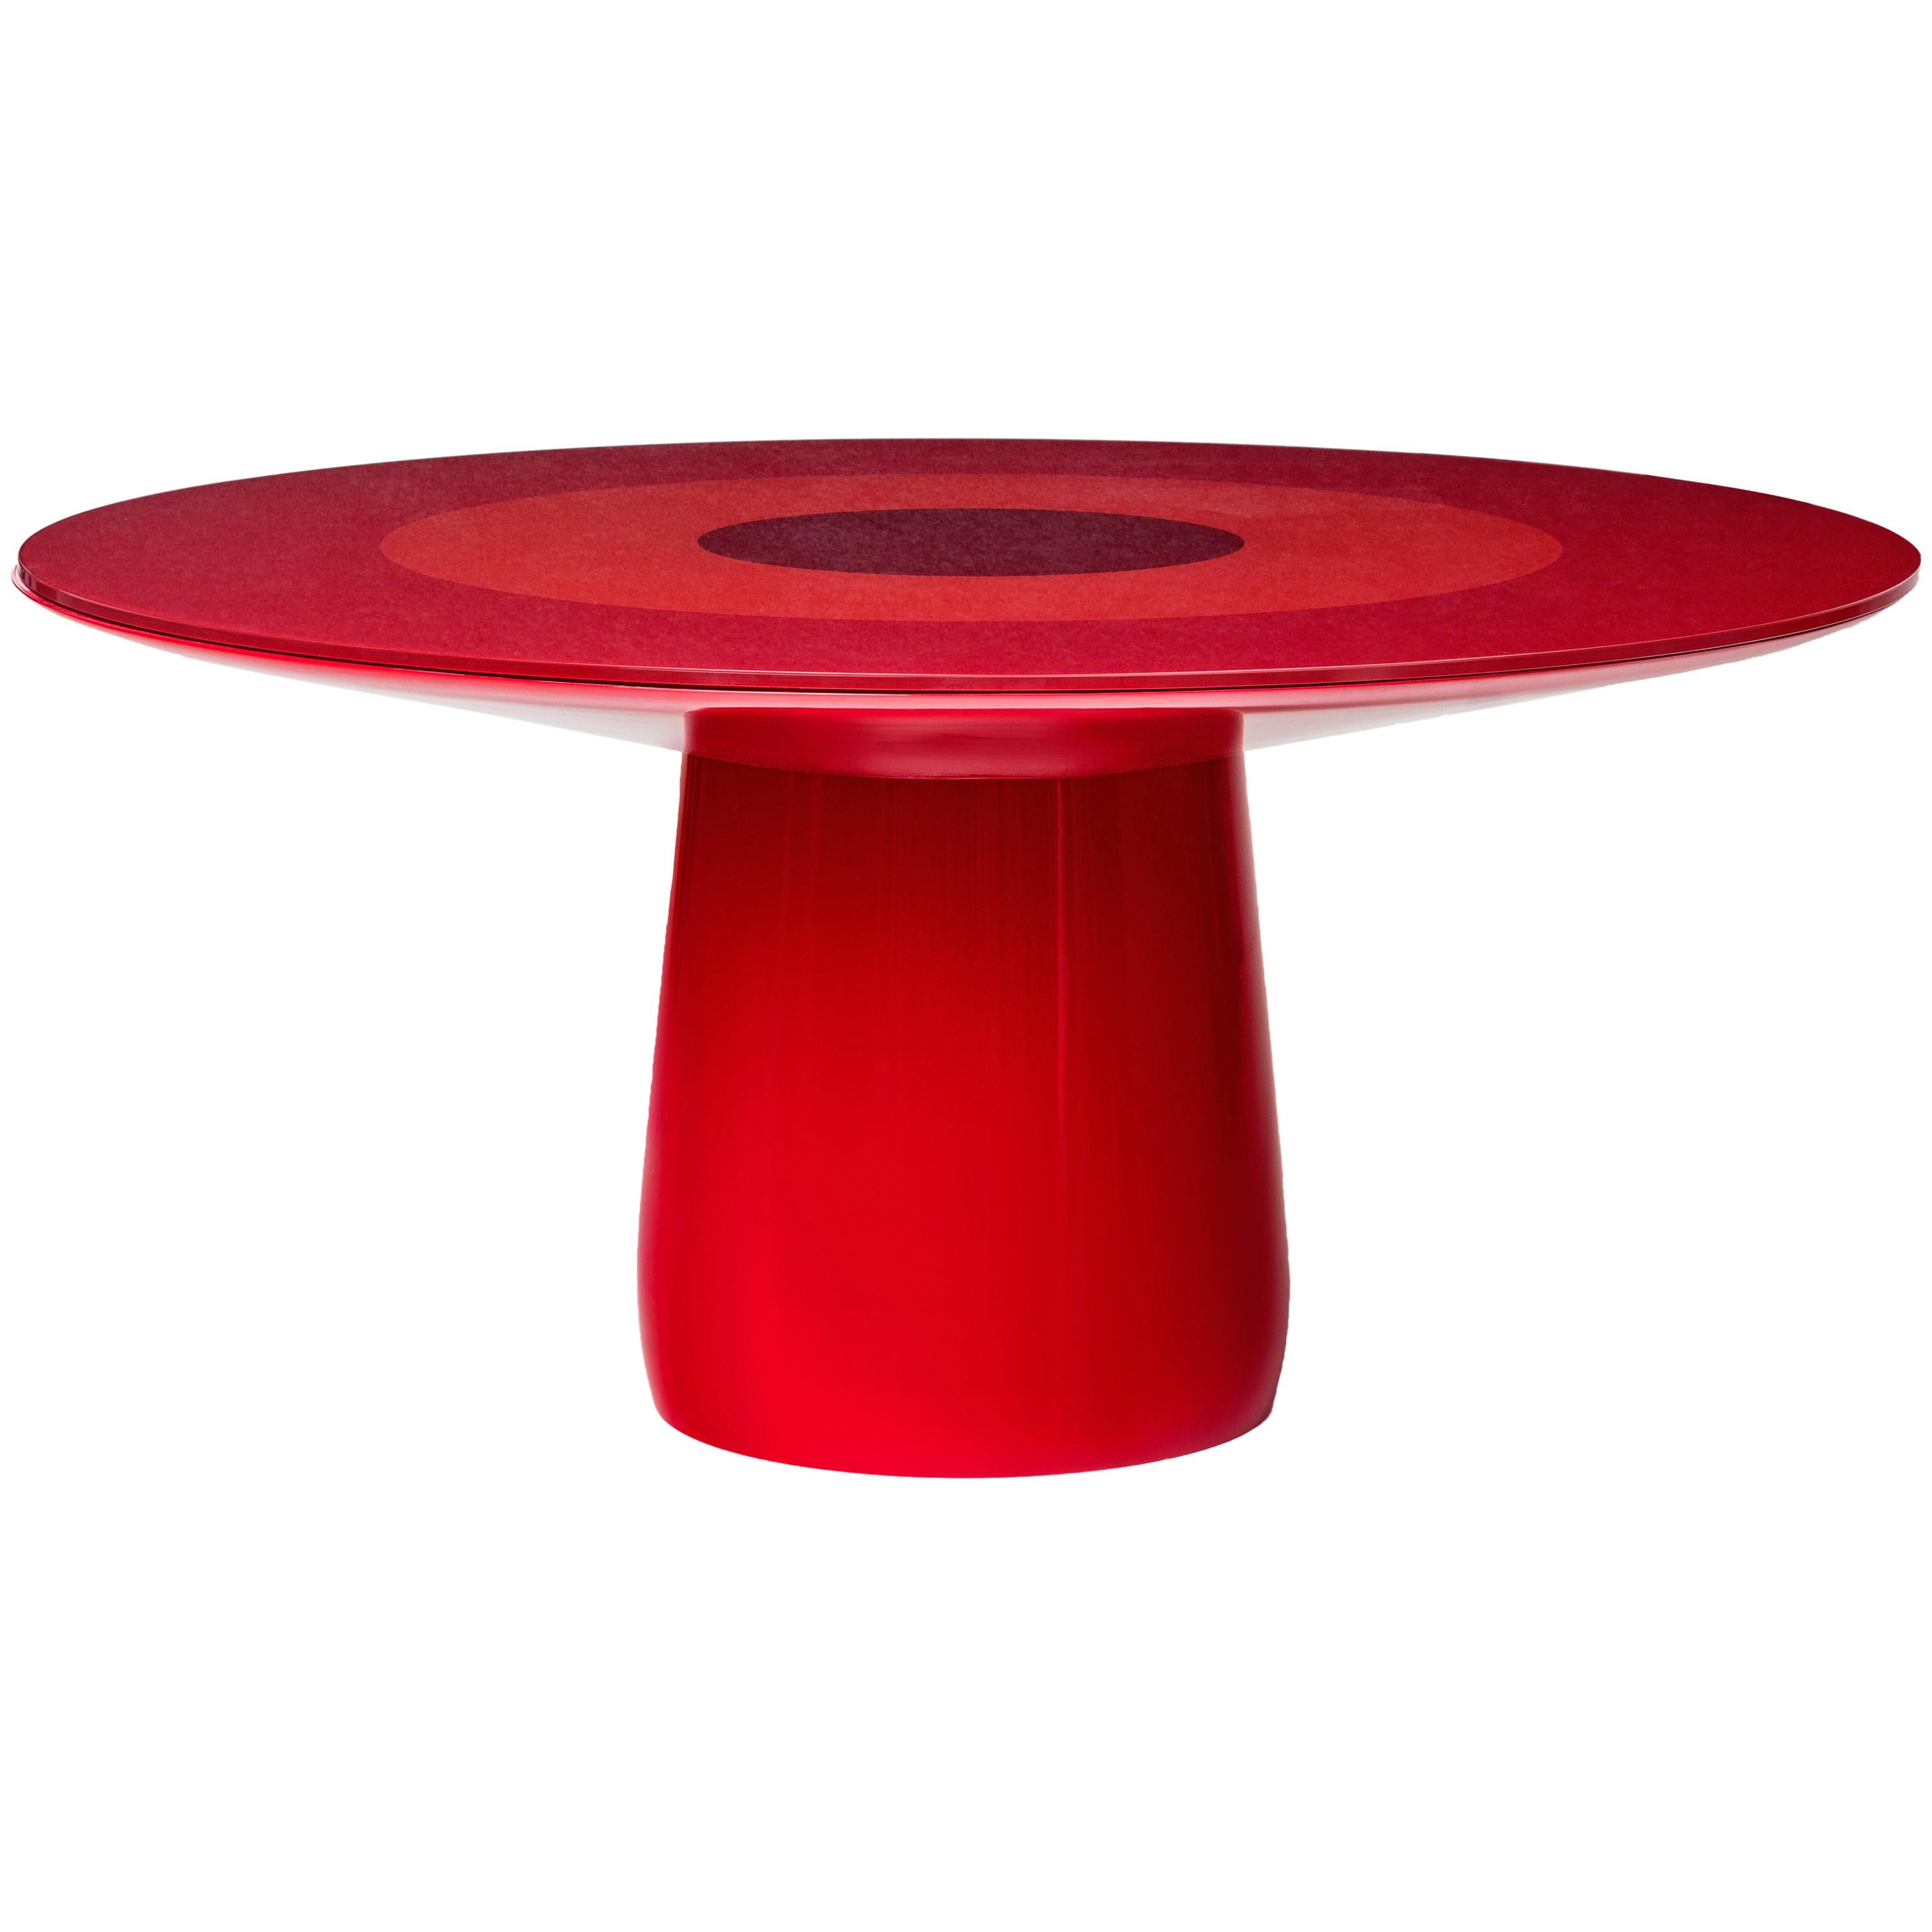 A round table with a central leg and under-surface section made of rigid polyurethane with a soft-polished red lacquered finish. The tabletop made of extra clear tempered glass with concentric red circles painted on the underside.

 